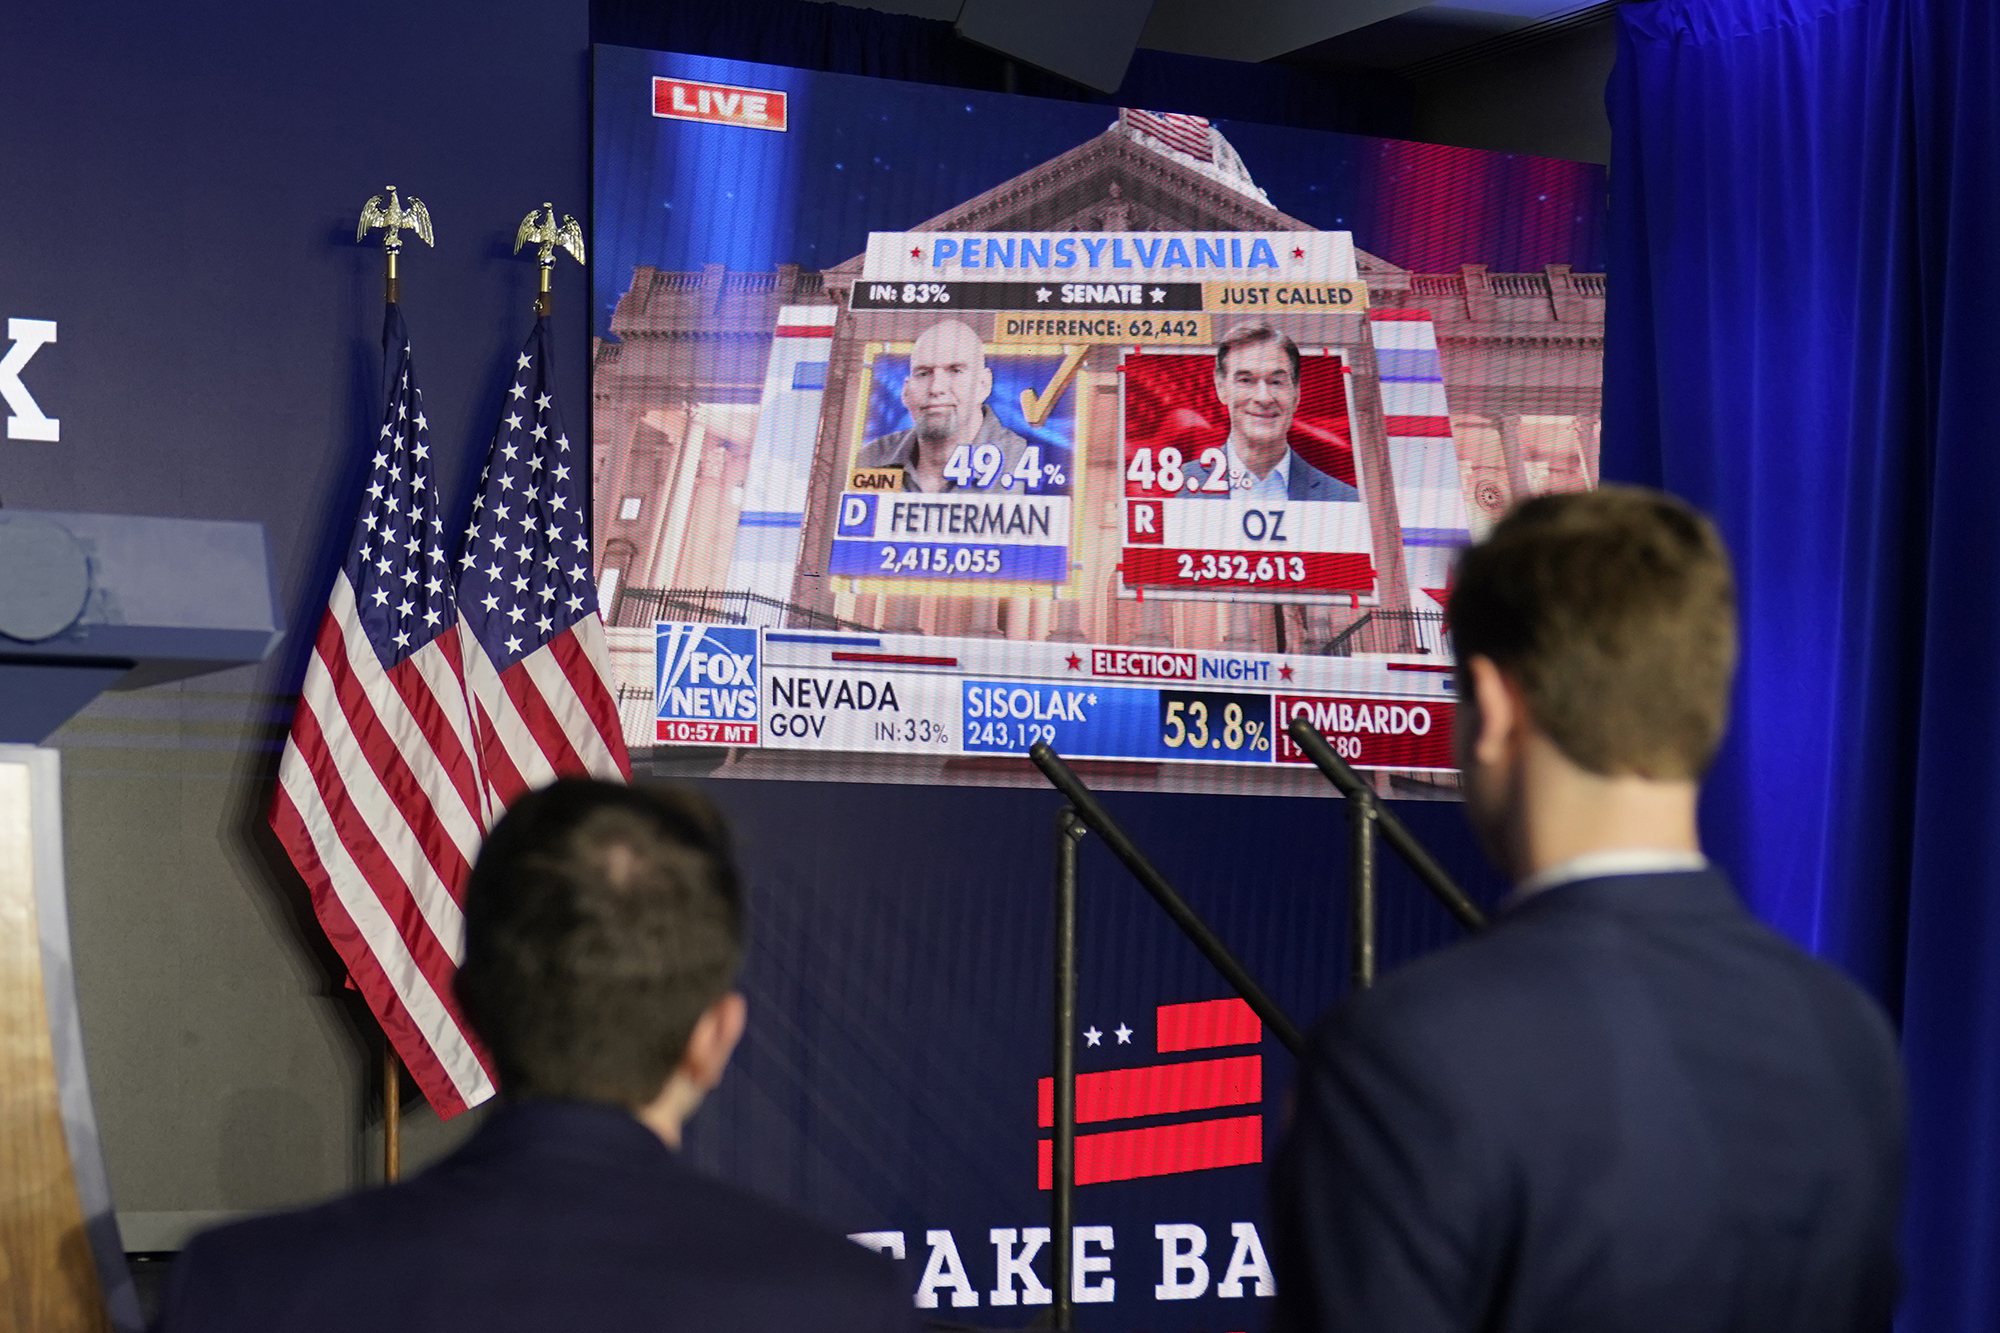 Two men in suits face a large TV screen showing Pennsylvania 2022 Senate election results.